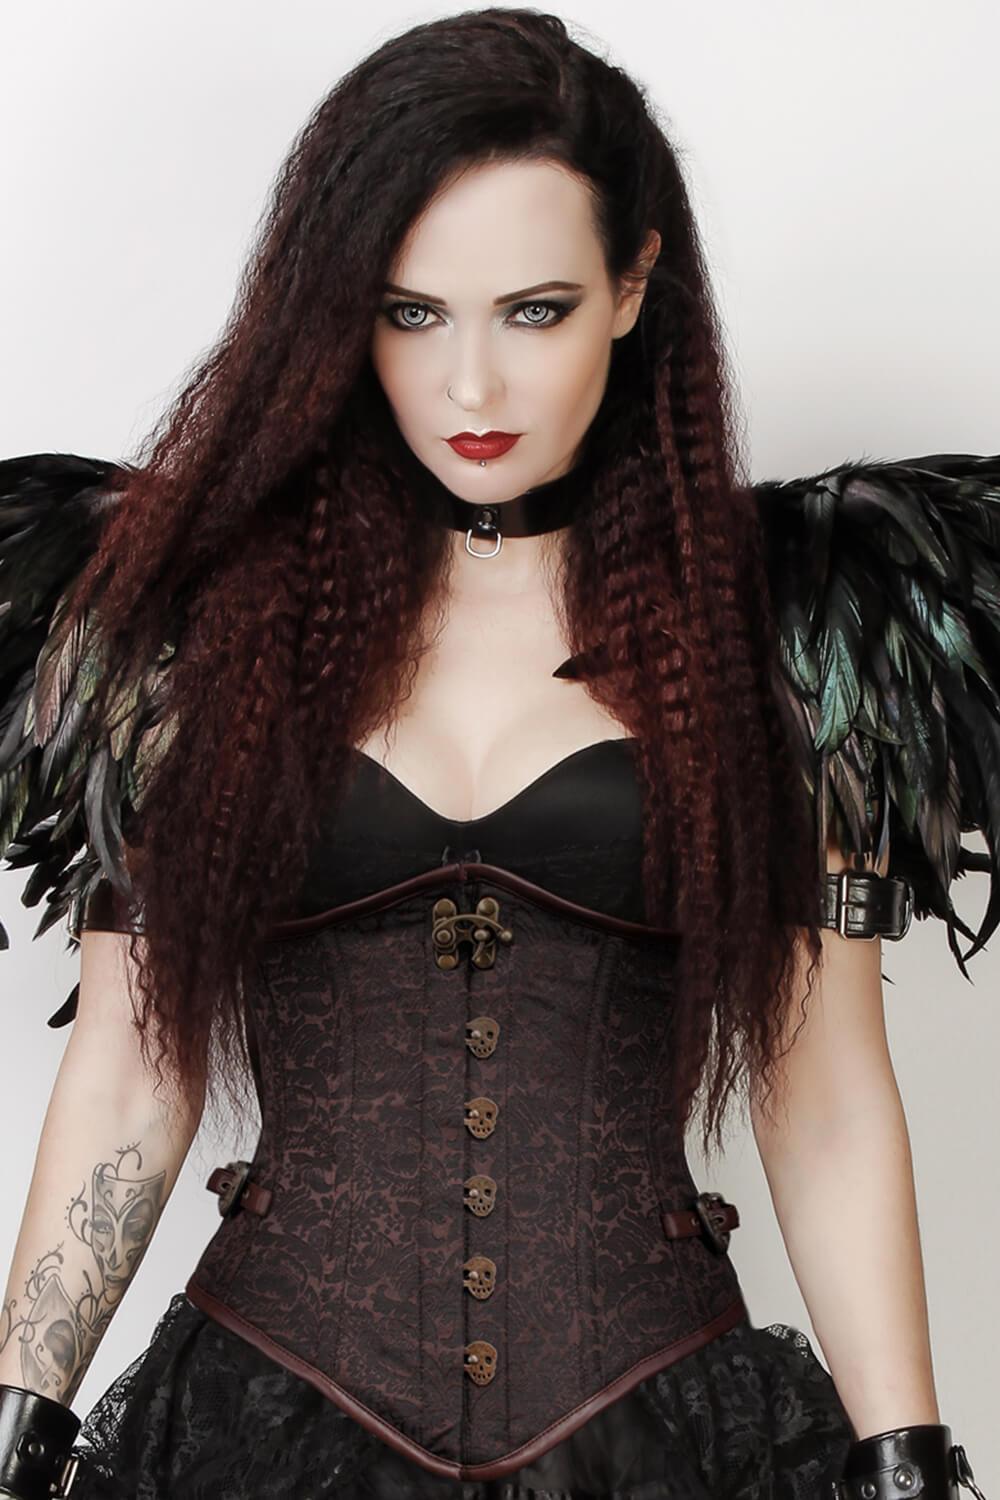 We have Bespoke Corset and Steampunk Corset for you right here